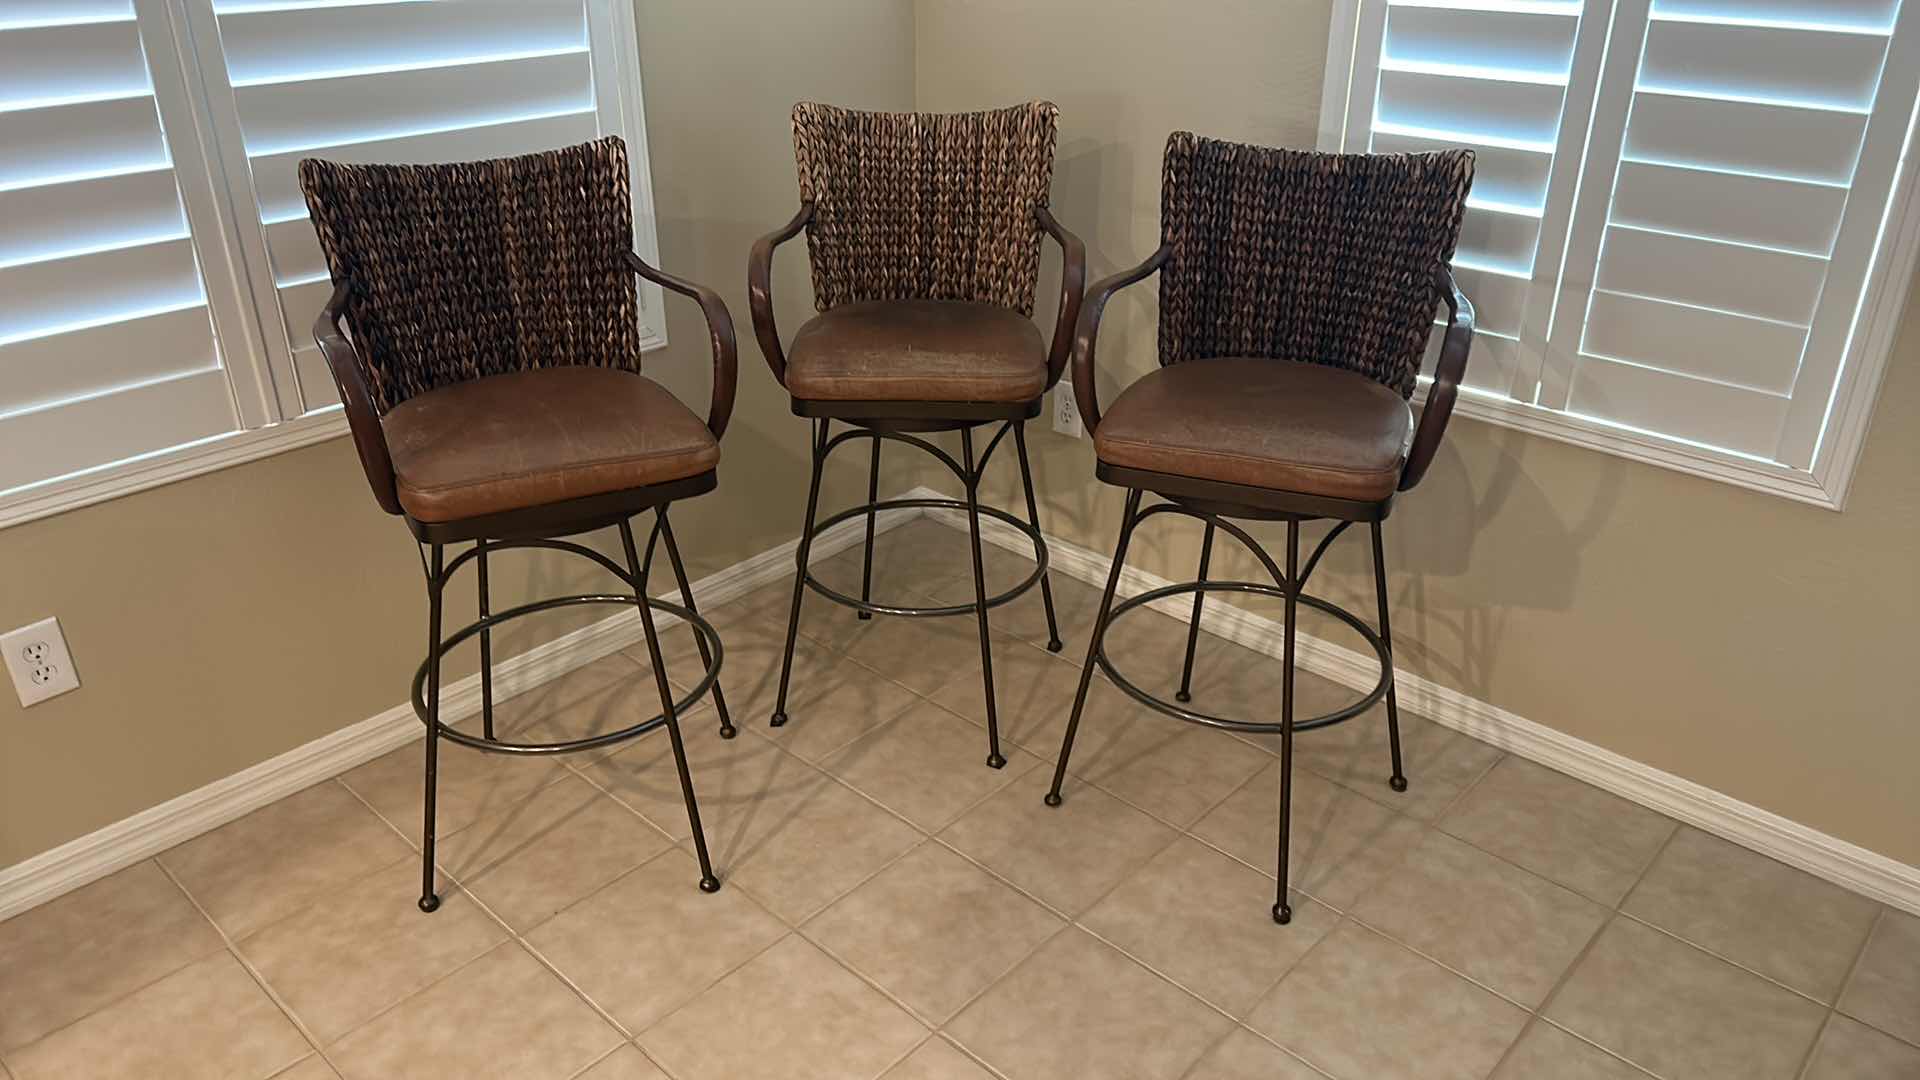 Photo 7 of 3-METAL AND RATTAN WOVEN SWIVEL BAR STOOLS W LEATHER SEATS,
SEAT HEIGHT 30", OVERALL HEIGHT 44"